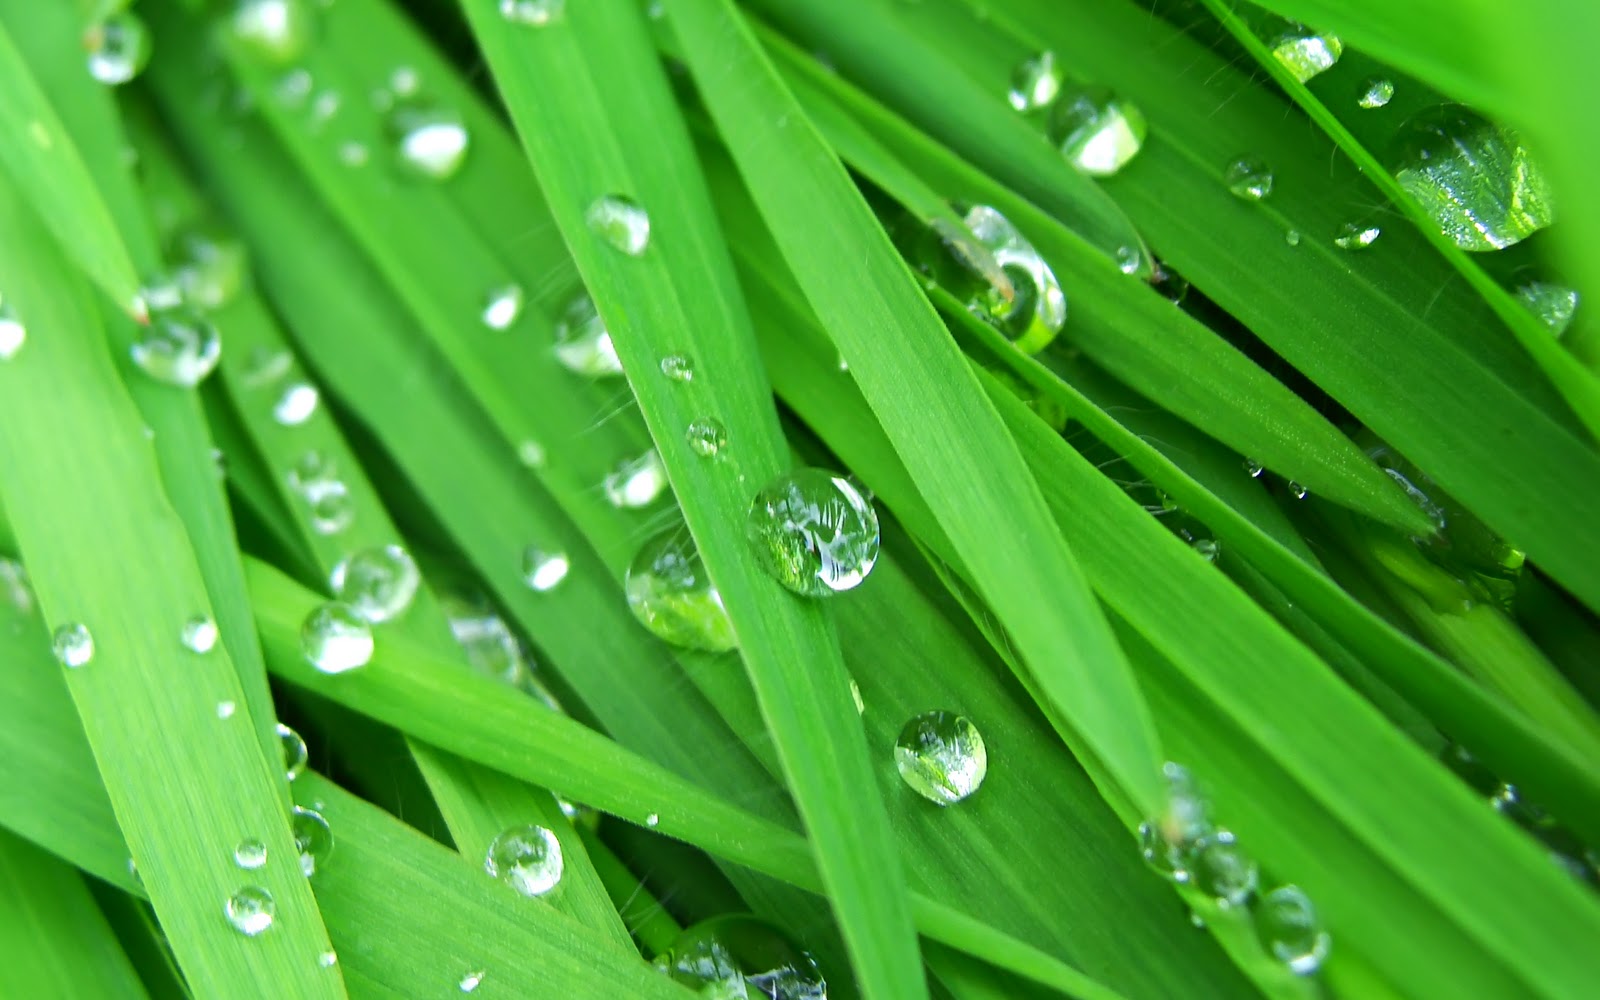 Wallpaper Of Raindrops However this wallpapers are